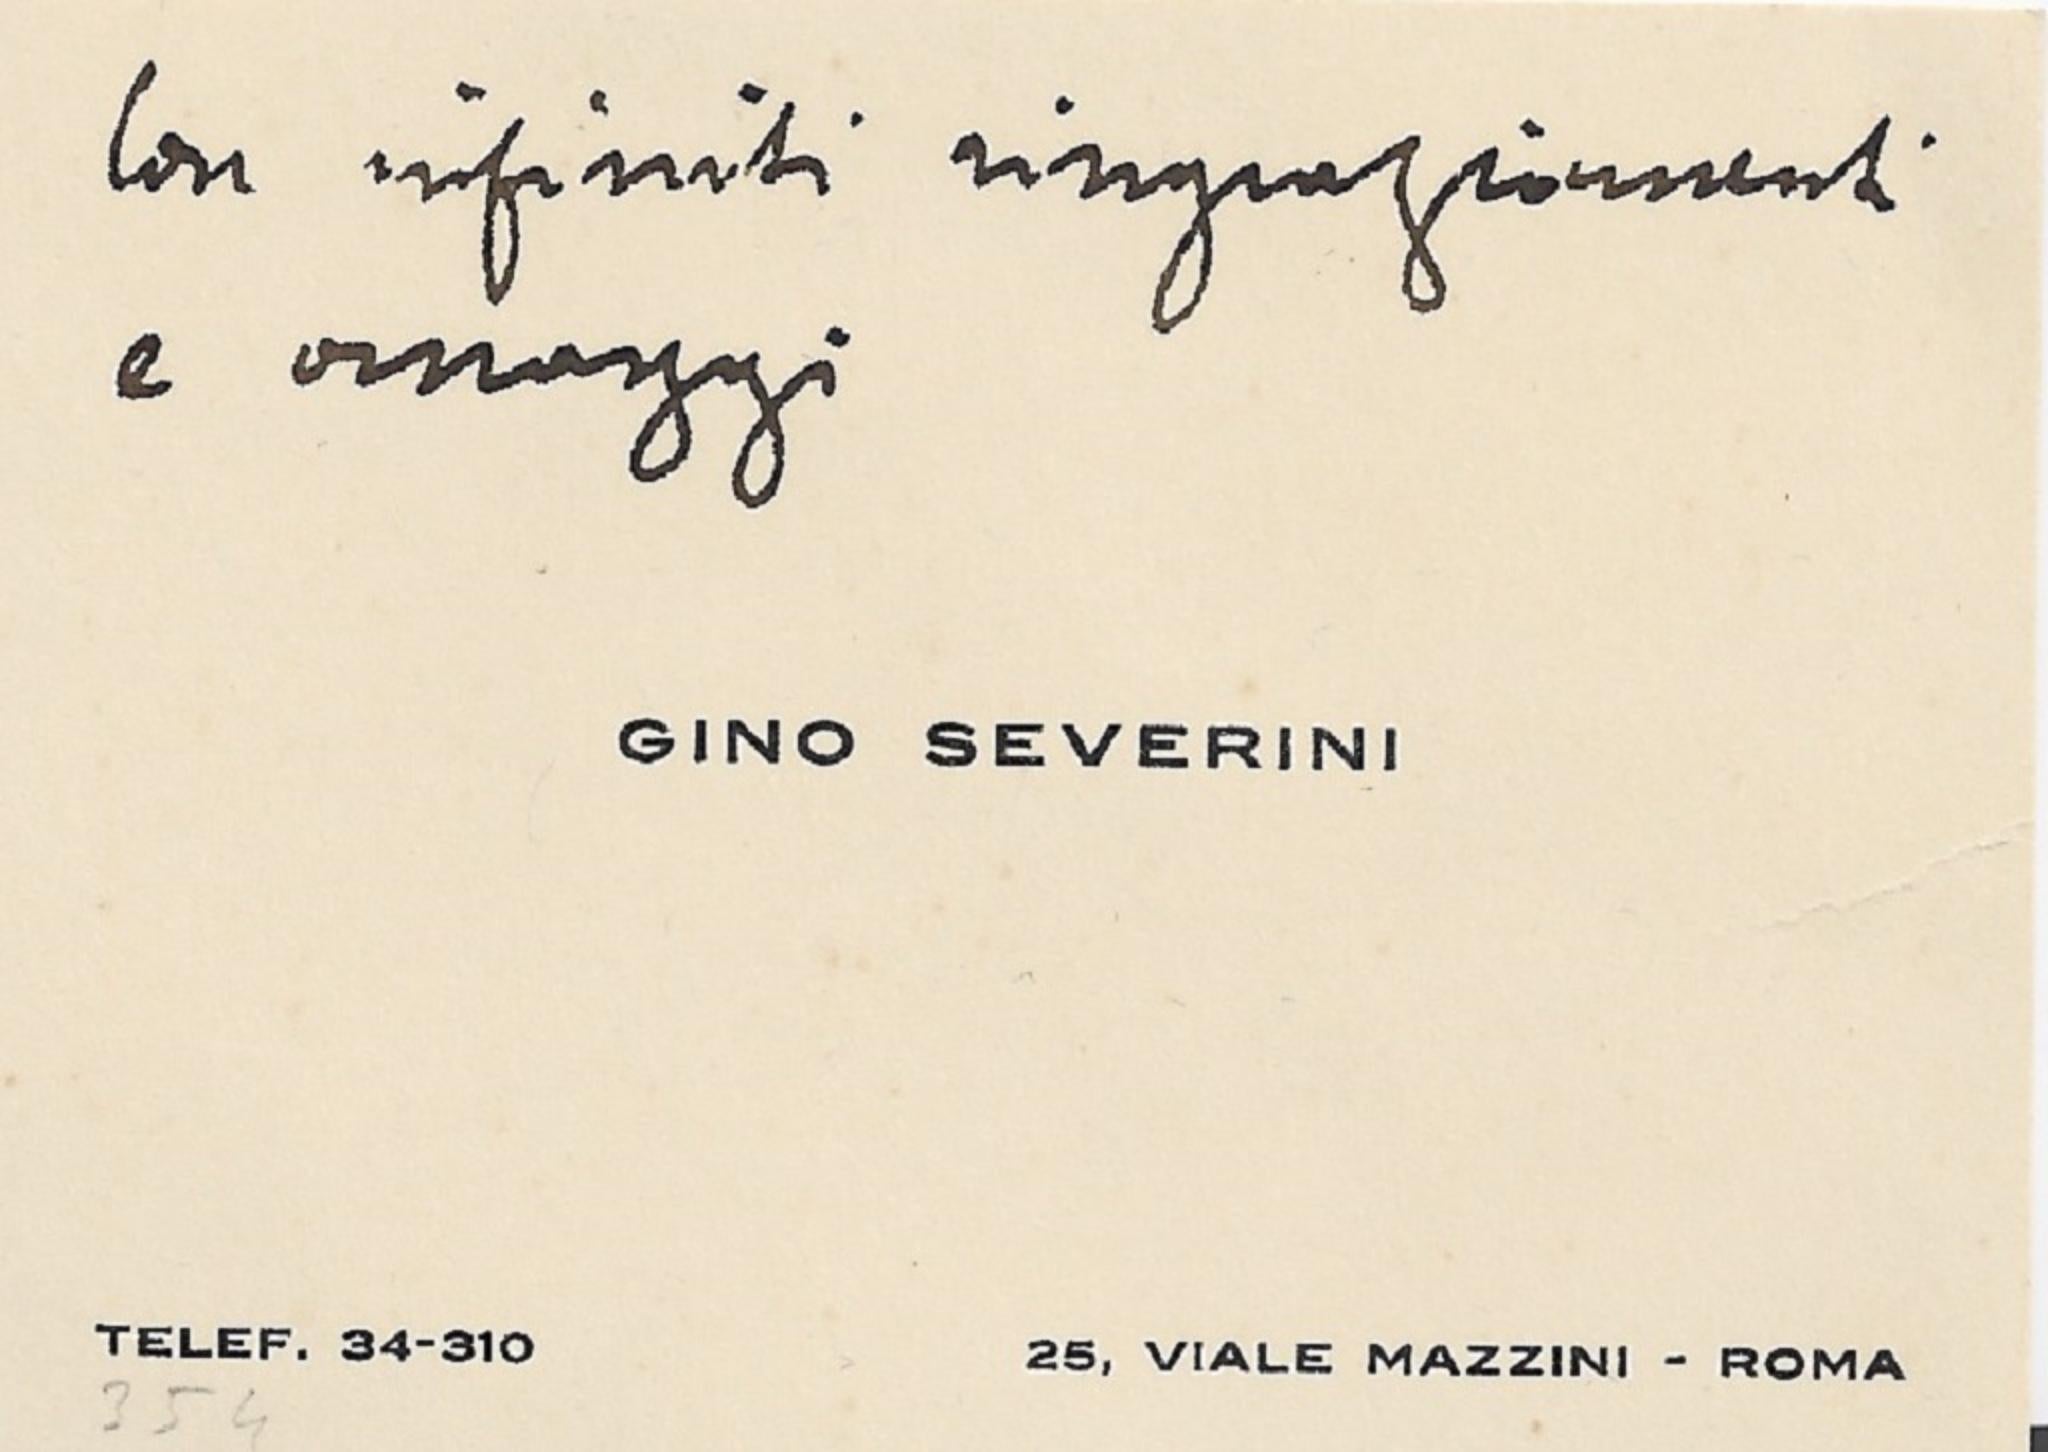 Severini's Business Cards with an autograph message to the Countess Anna Laetitia Pecci-Blunt. Around 1940's. 
Two business cards. In Italian. Perfect conditions.

This couple of business cards conteins an autograph message of greetings referring to